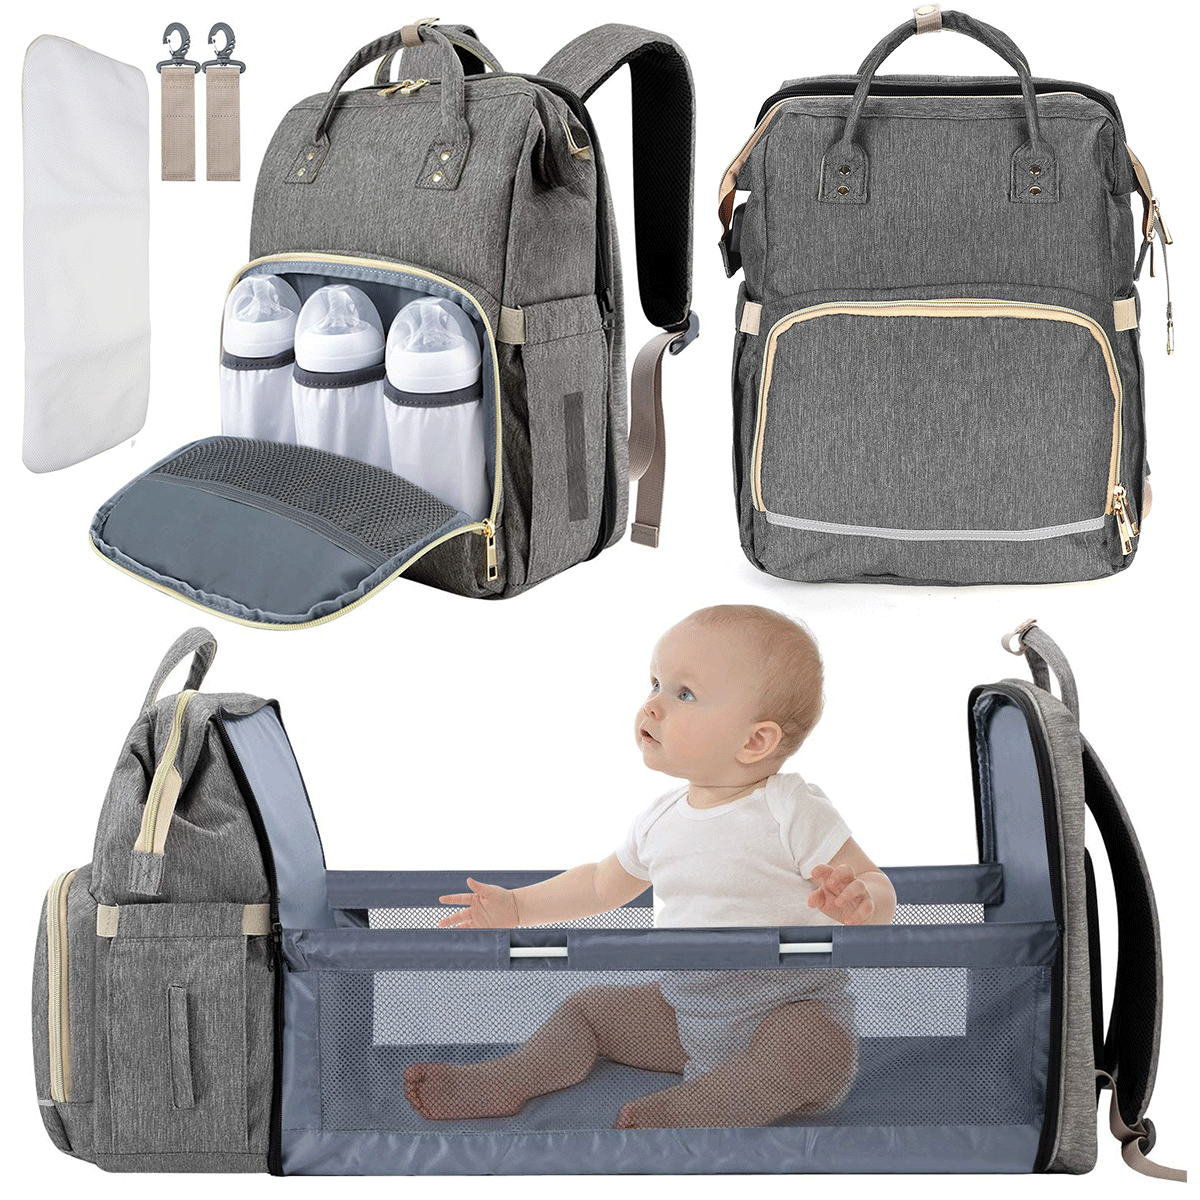 Large Capacity Baby Crib with Small Pillow 4 in 1 Diaper Bags Backpack with Foldable Baby Bed Waterproof Travel Bassinet Baby Bags USB Charging Port 